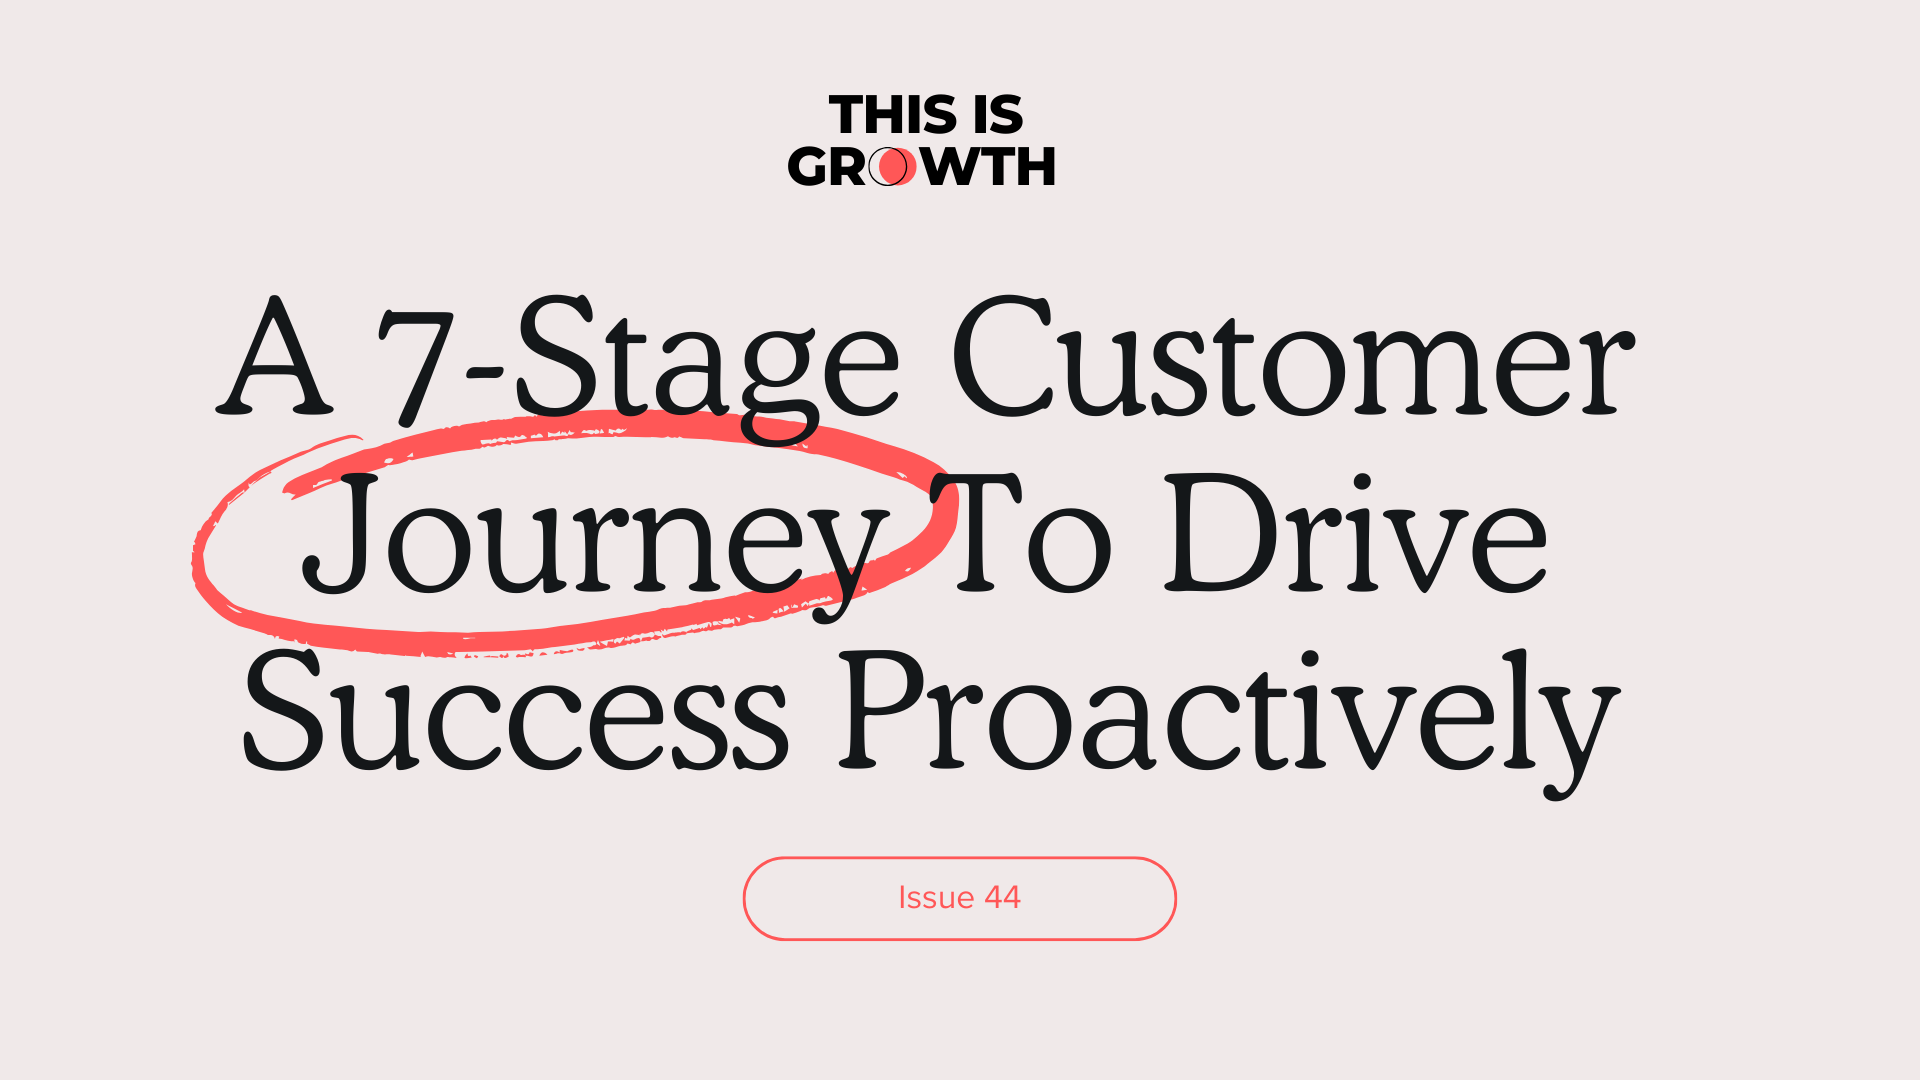 A 7-Stage Customer Journey To Drive Success Proactively